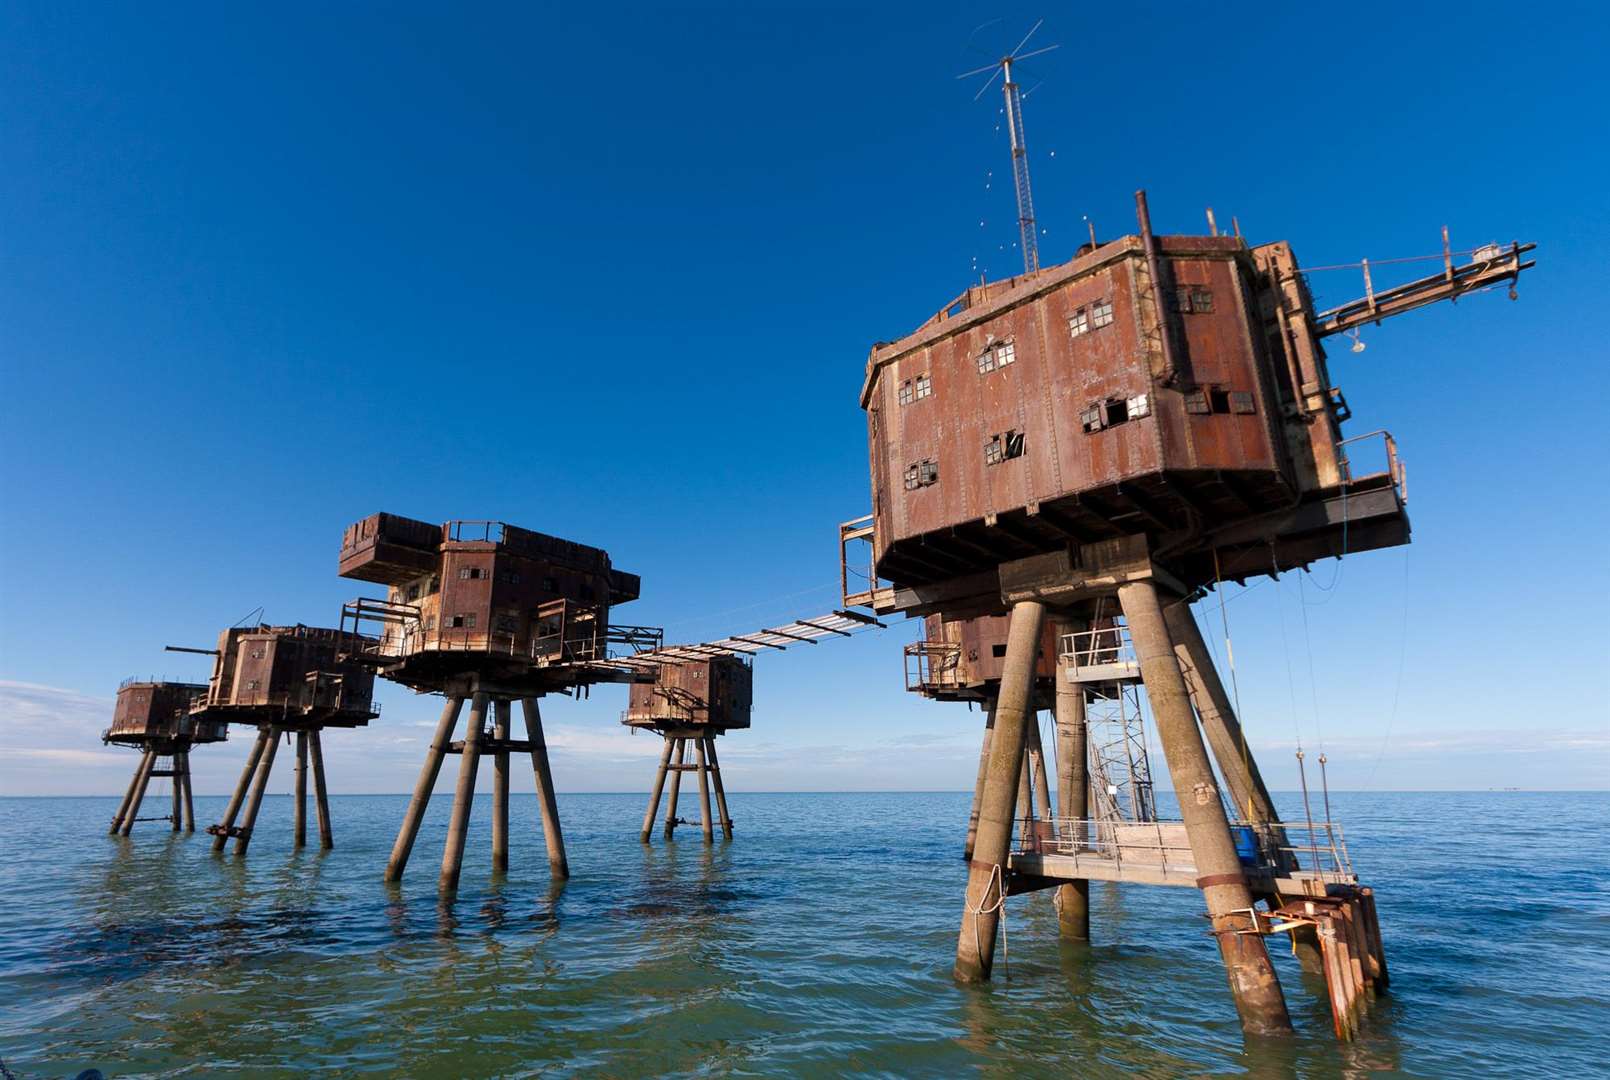 The Maunsell Forts off the Kent coast (5664748)